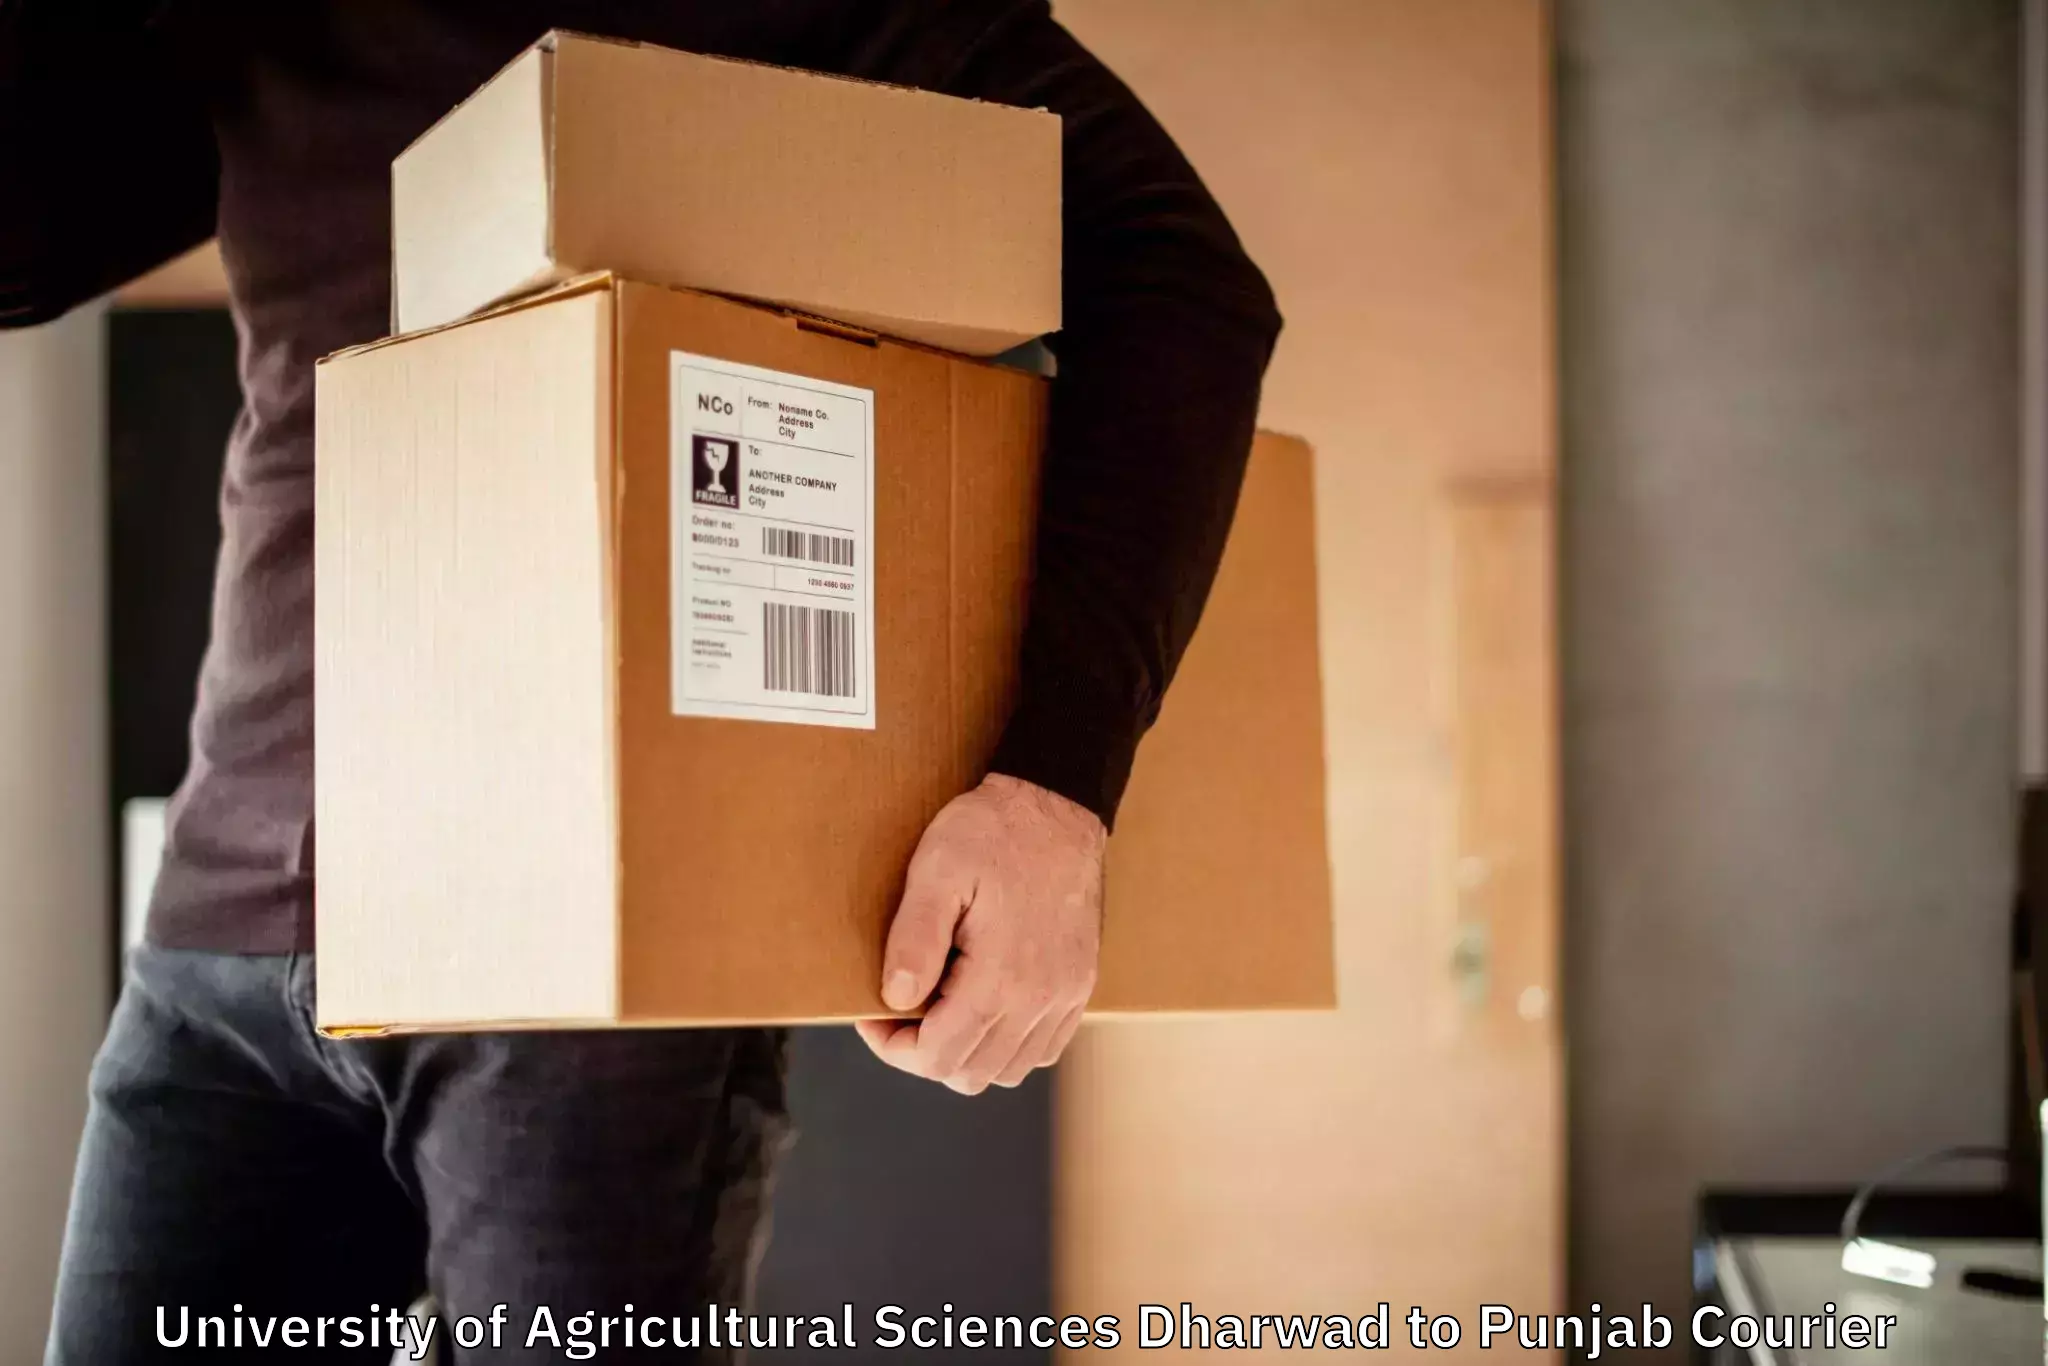 Secure shipping methods University of Agricultural Sciences Dharwad to Zirakpur